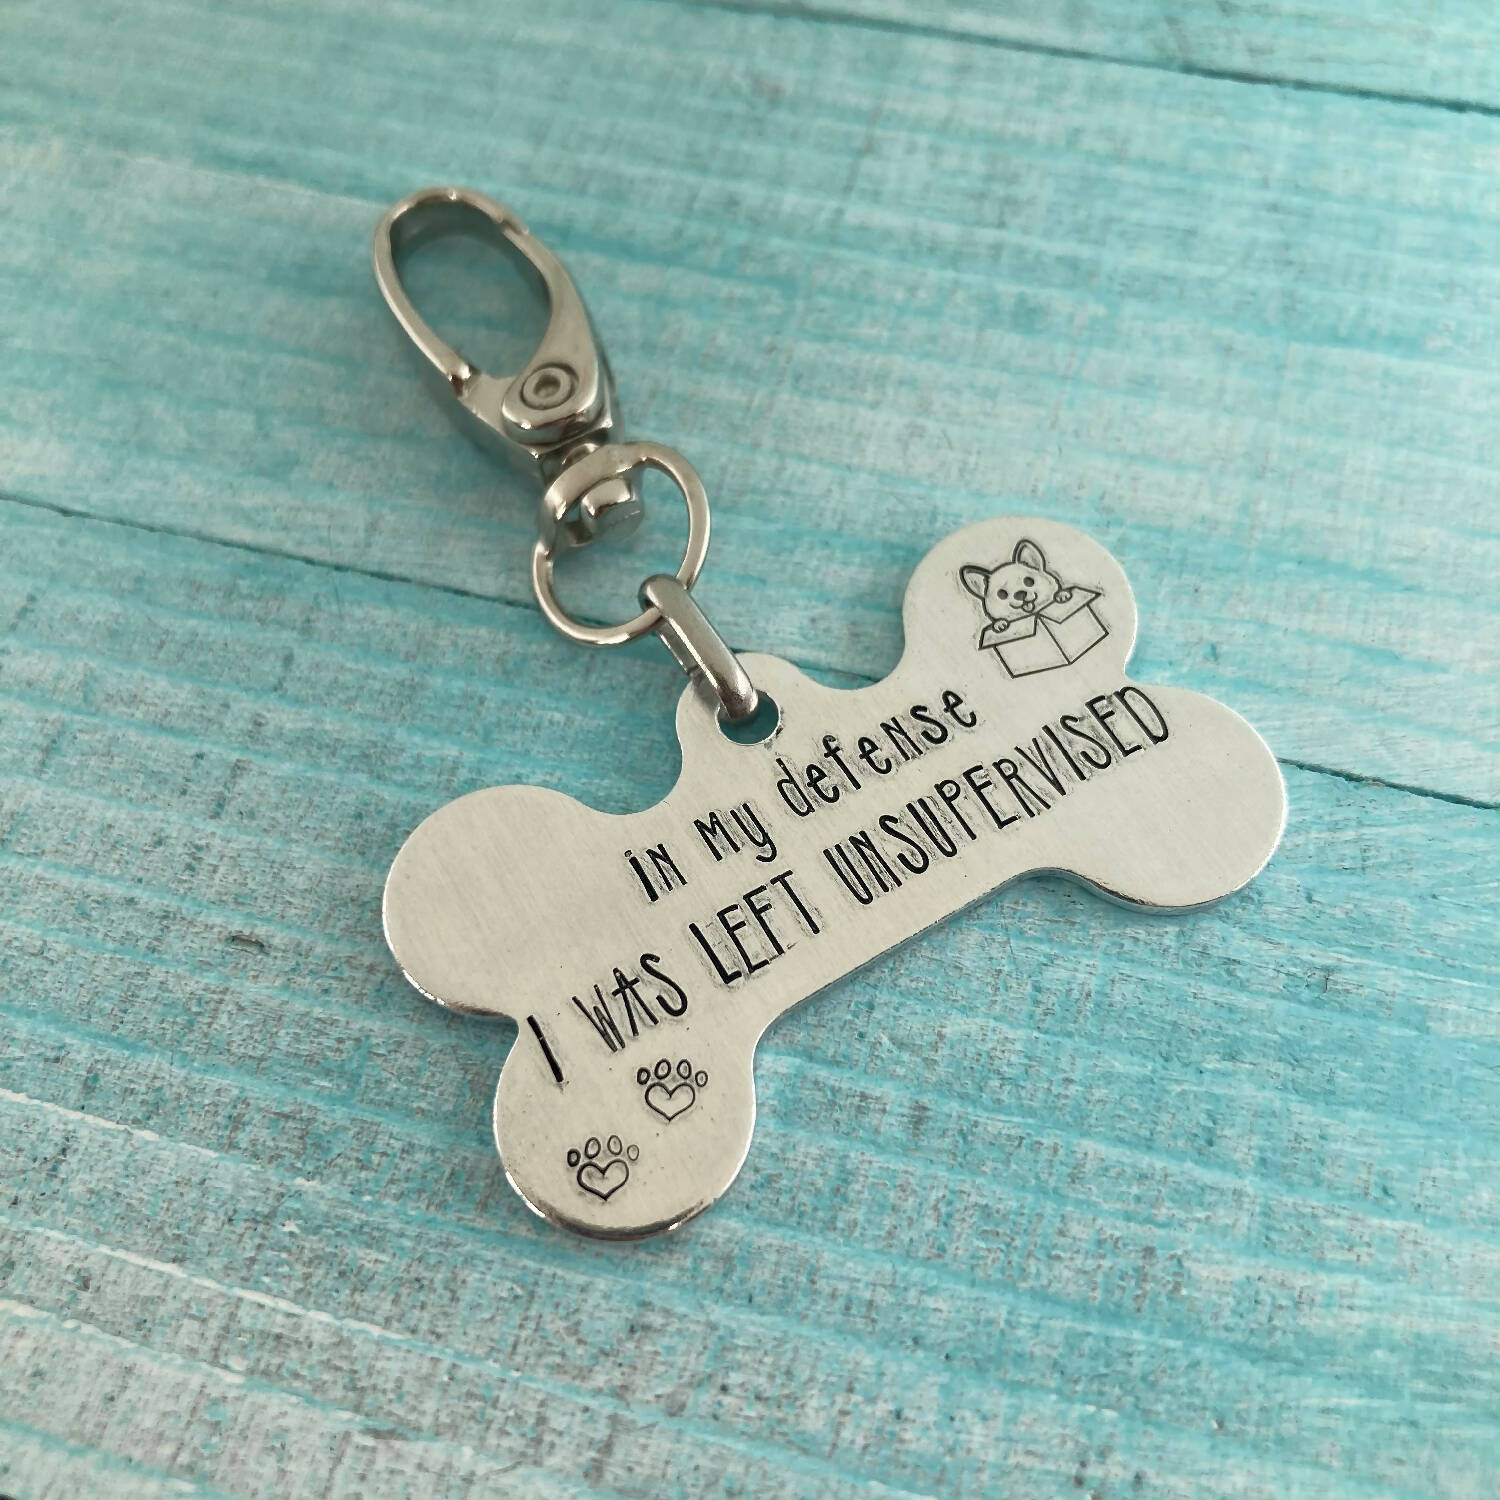 Pet Tag - In my defense I was left unsupervised